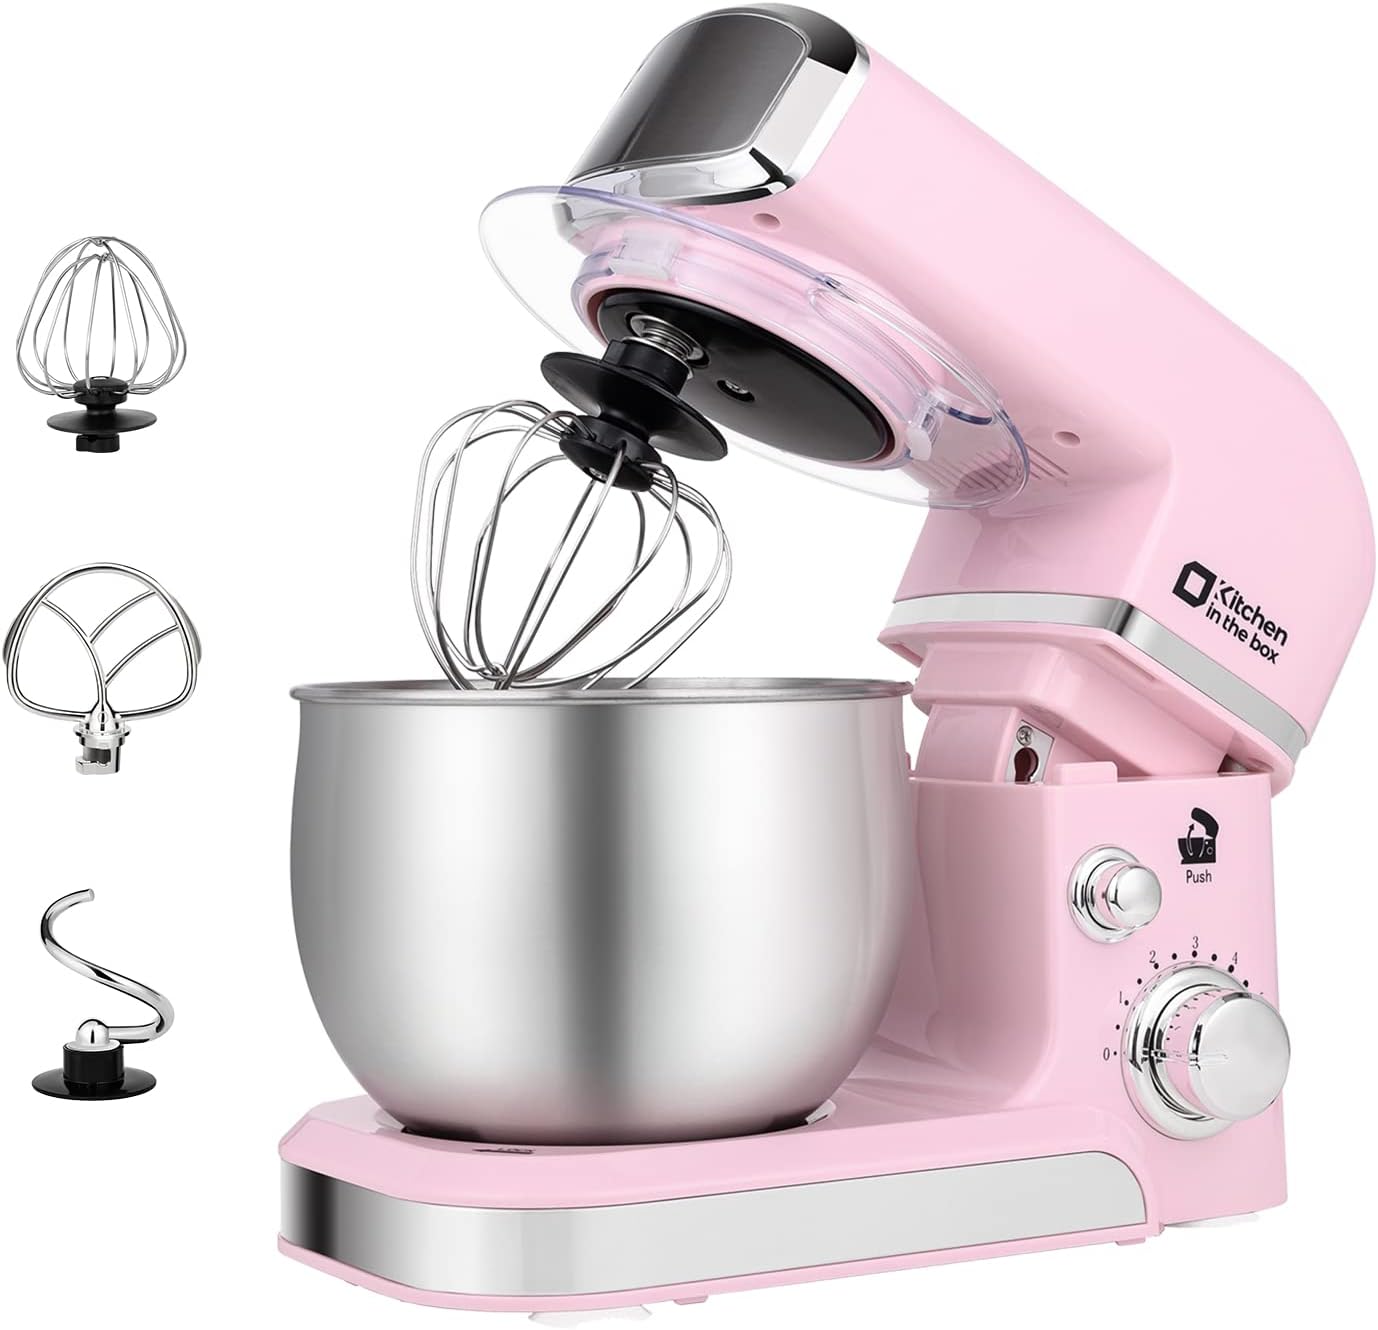 120 Volts 3-In-1, 300 W Tilt-Head Electric Stand Mixer With Stainless Steel Bowl BLACK & Other Color options